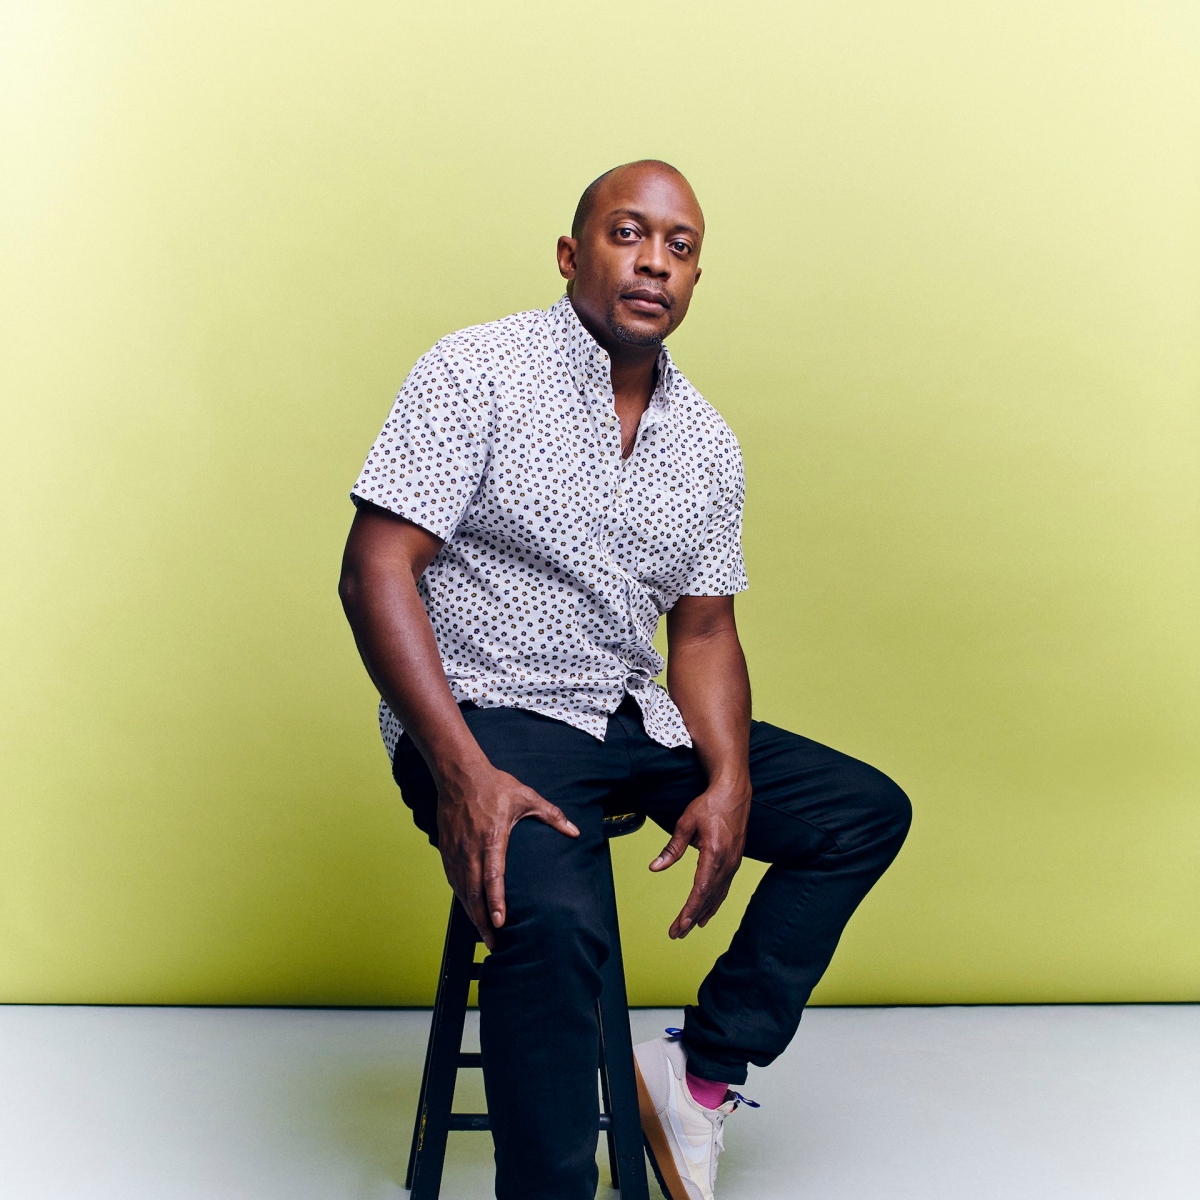 Gala honoree Hank Willis Thomas with a patterned shirt and blue pants sitting on a stool in front of a yellow wall. 